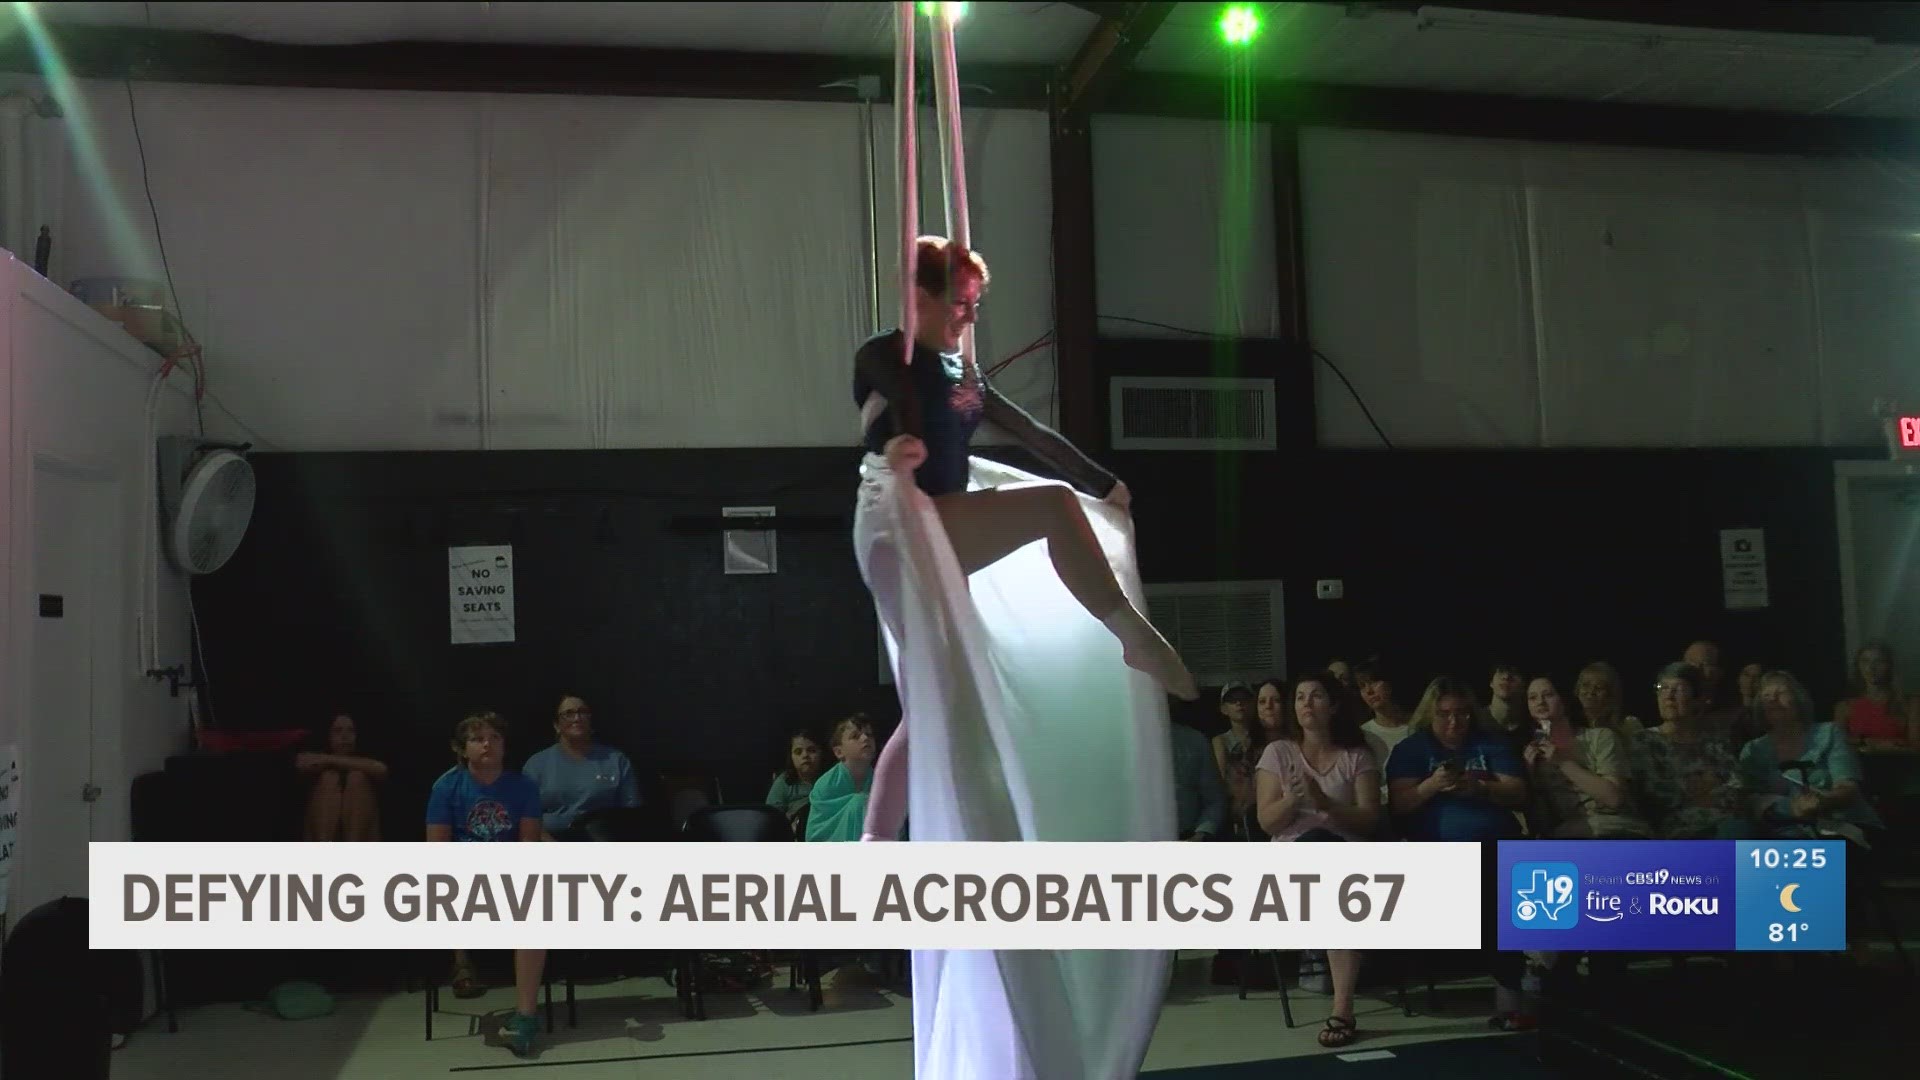 Regina Money picked up aerial lessons just before her 60th birthday, now she's set to compete on the National stage at 67.